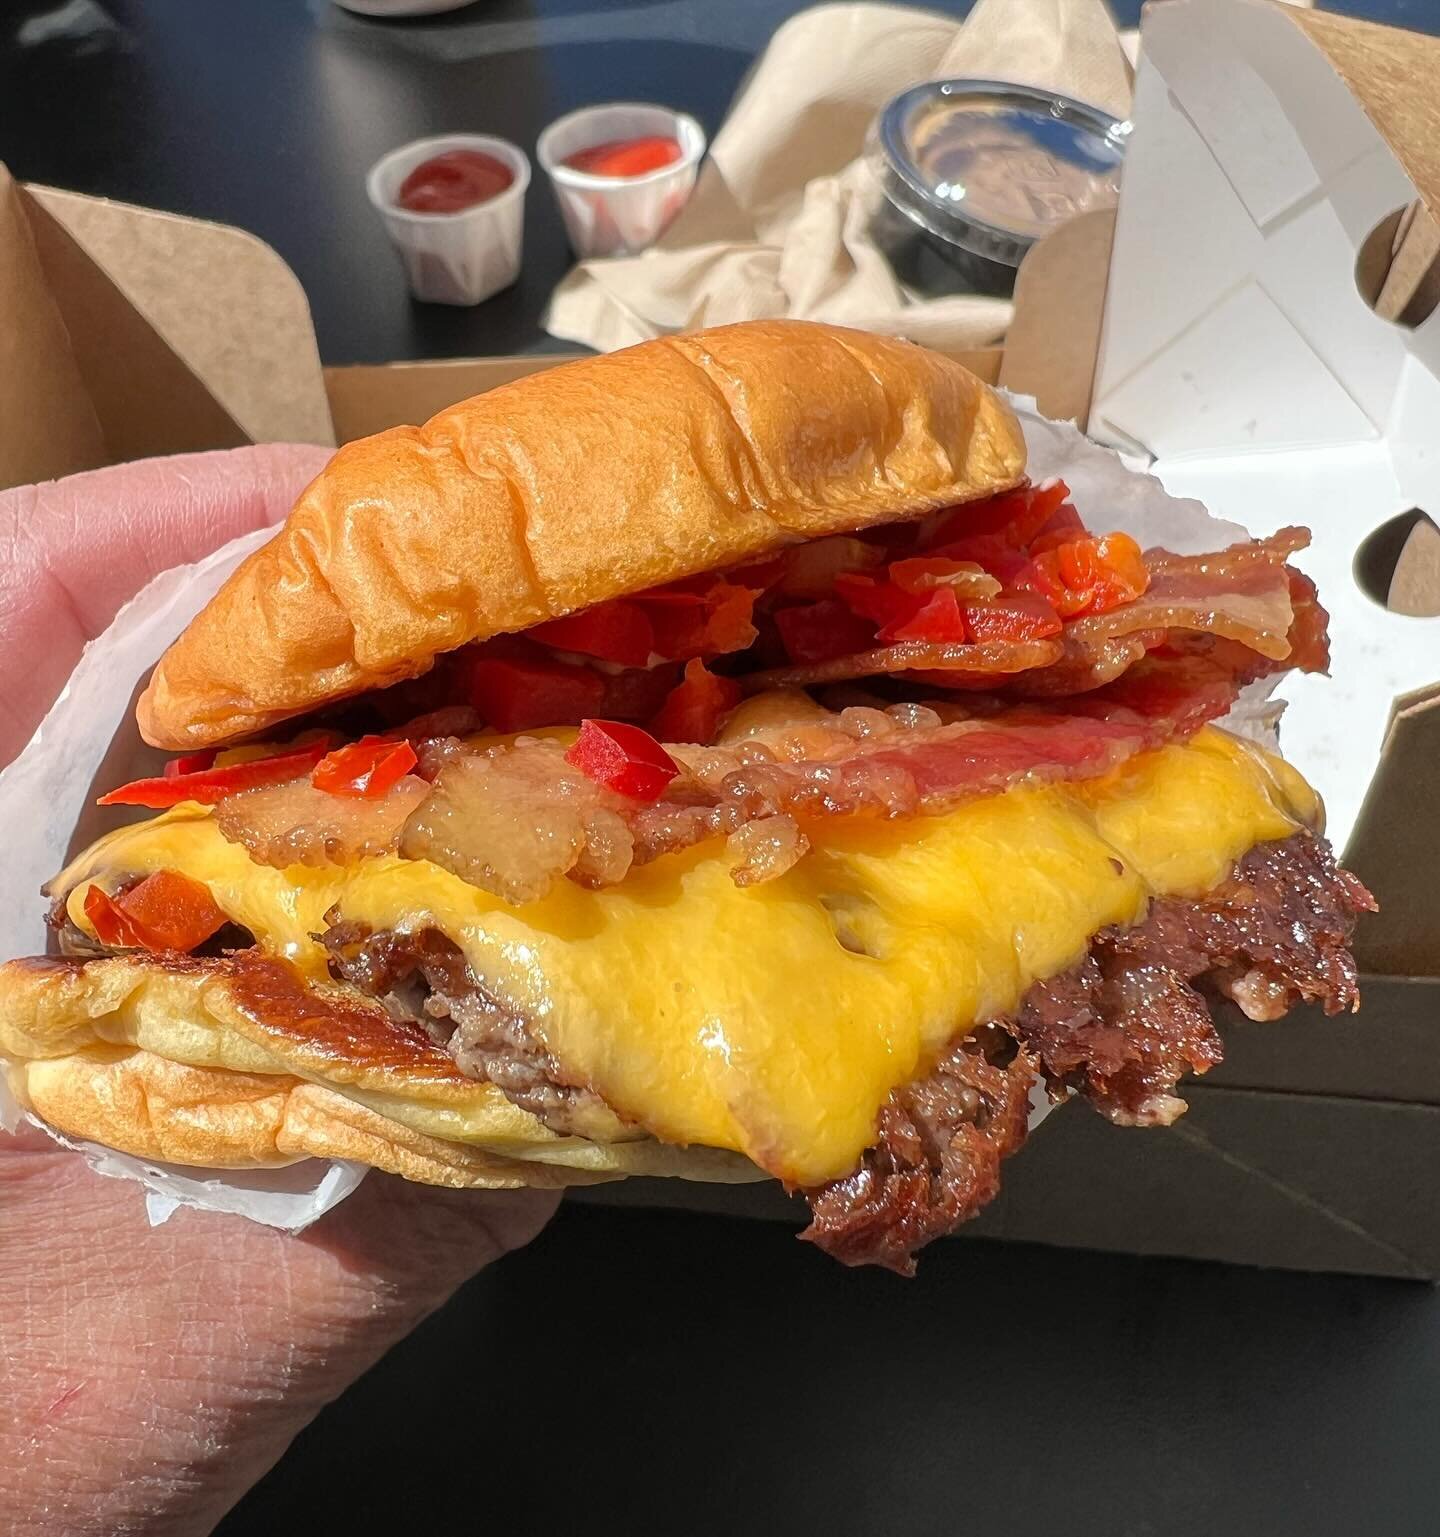 Free Shake Shack!  Get a free Smoke Shack burger using code BigWins on app or kiosk!  No catch, it&rsquo;s free (and delicious)! @shakeshack #sorryinnout #burger @foodobservations